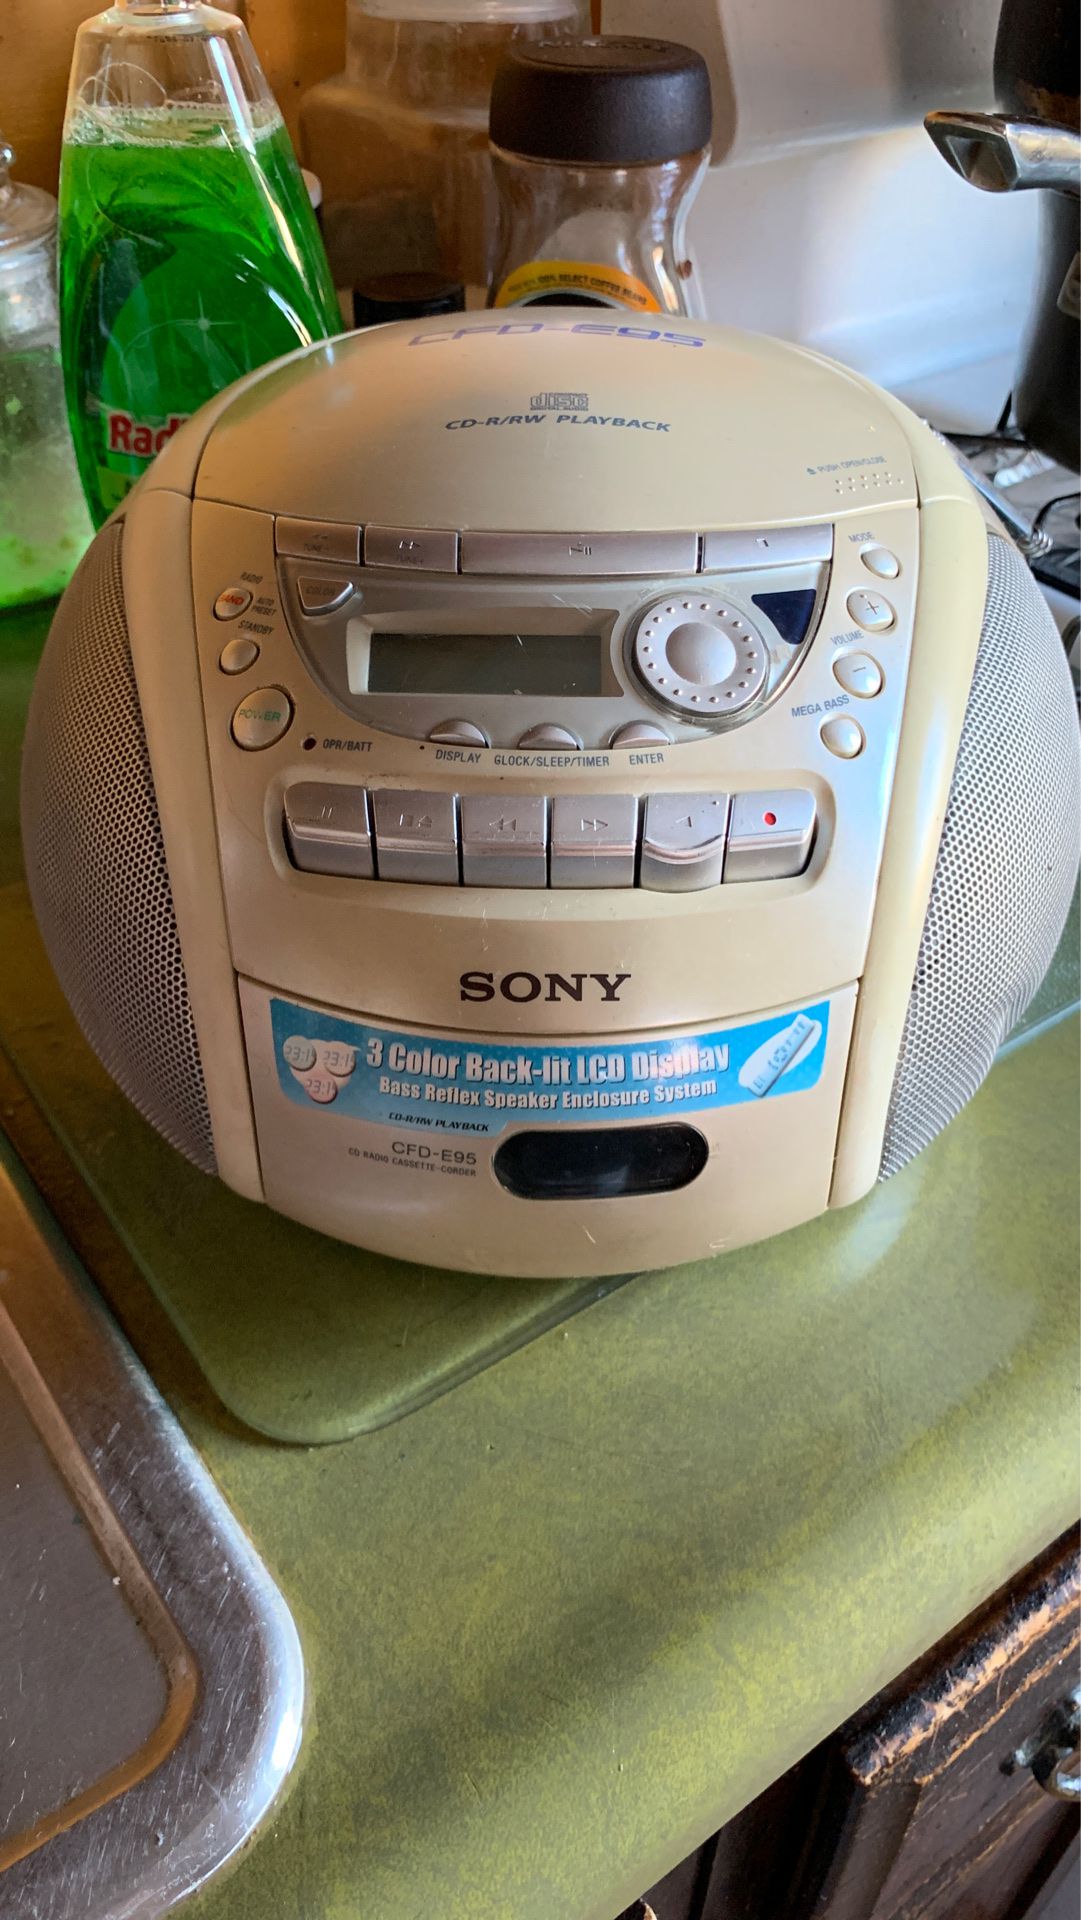 SONY boombox CFD-W888 for Sale in Milford, CT - OfferUp